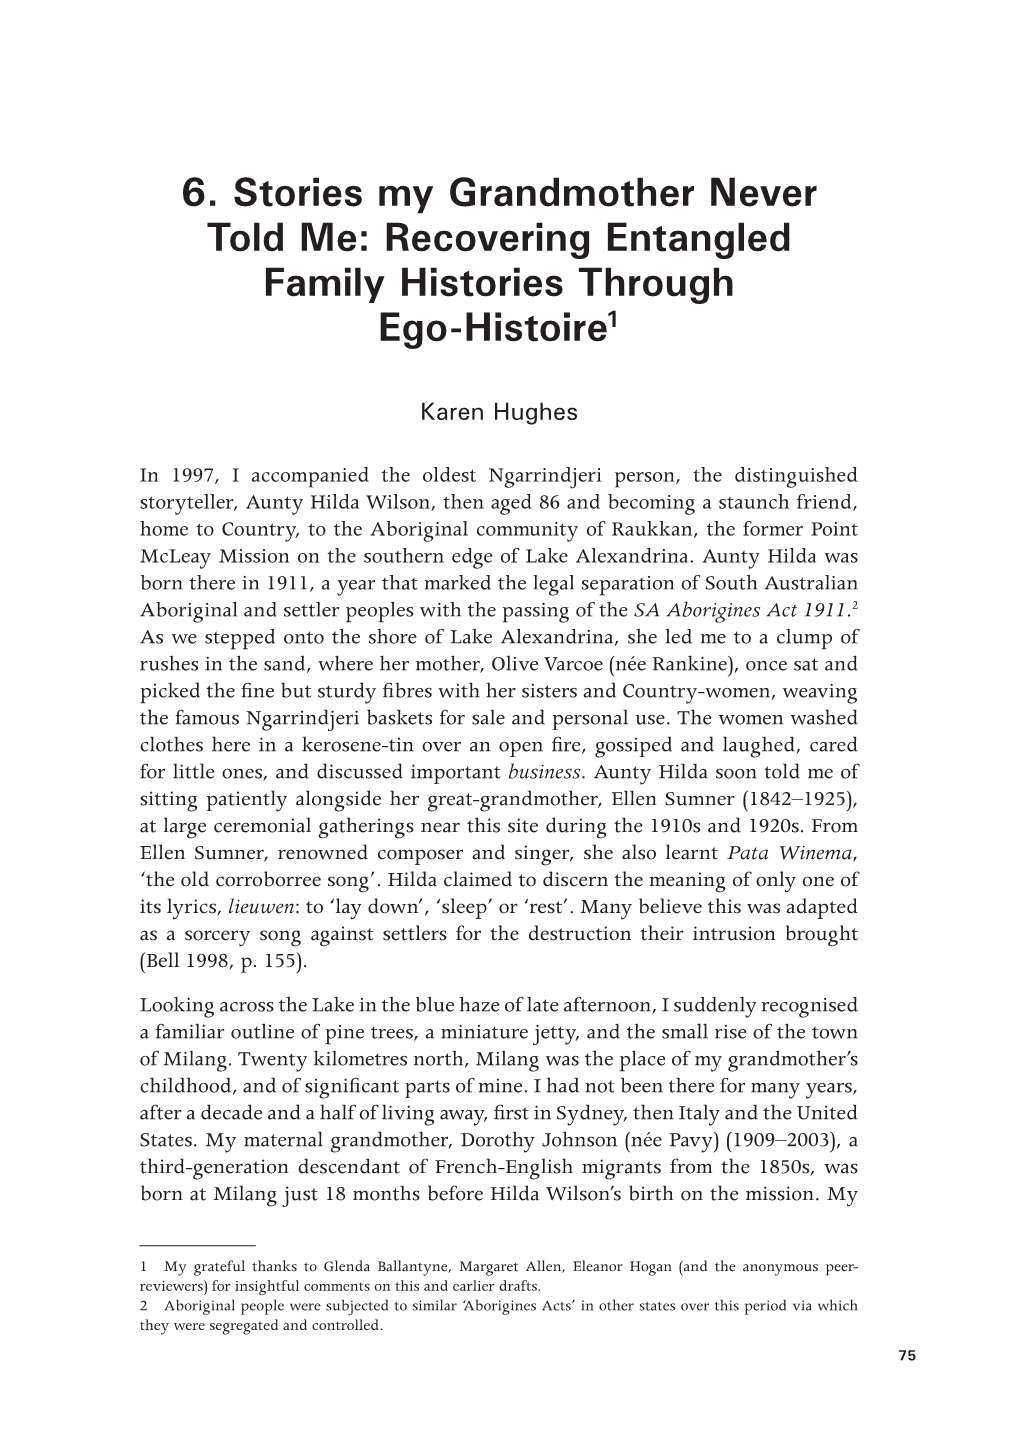 Recovering Entangled Family Histories Through Ego-Histoire1